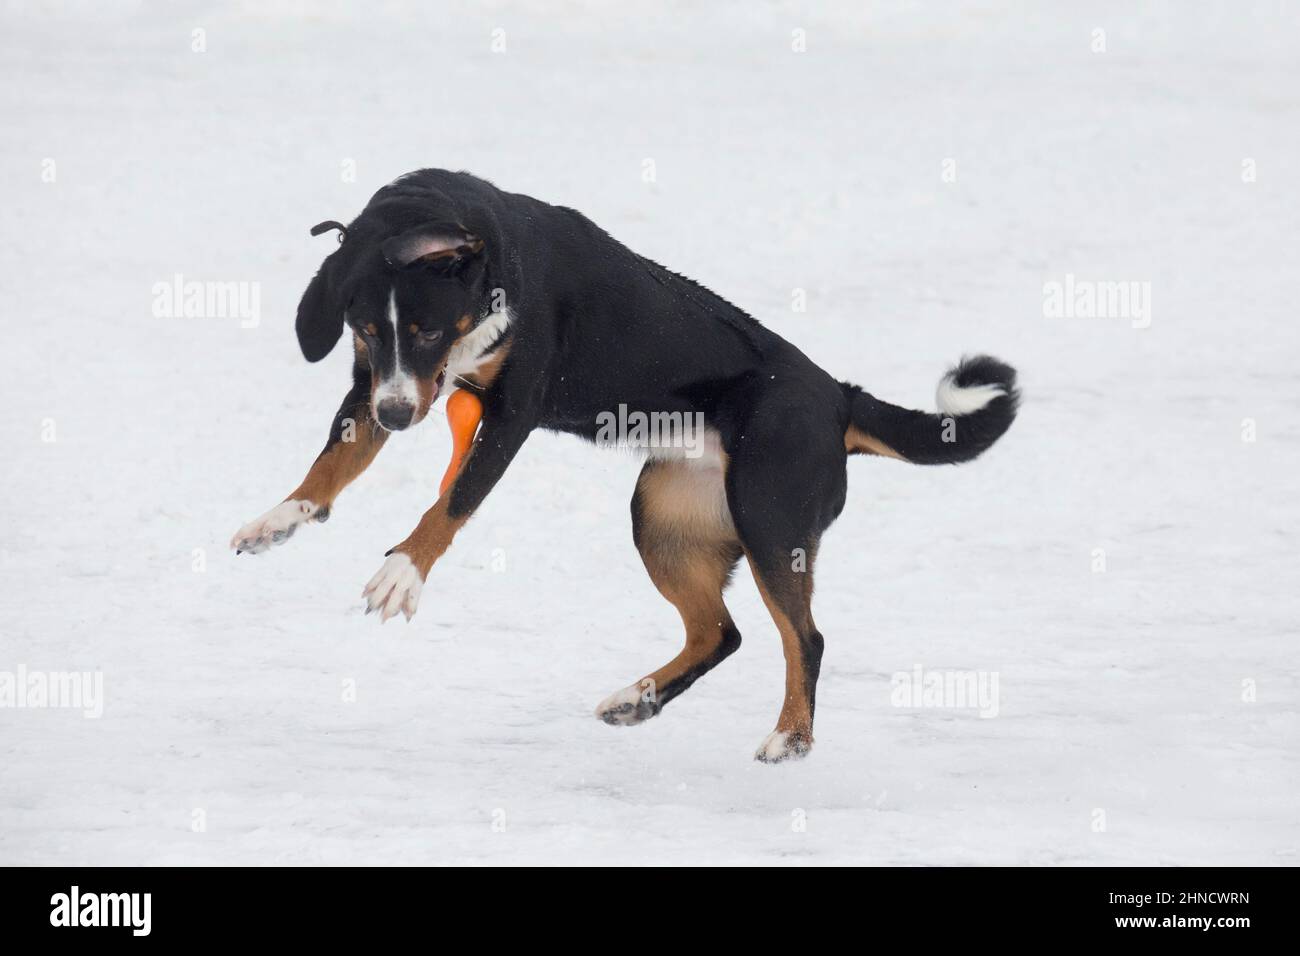 Cute appenzeller sennenhund puppy is jumping and playing with his toy on a white snow in the winter park. Pet animals. Purebred dog. Stock Photo